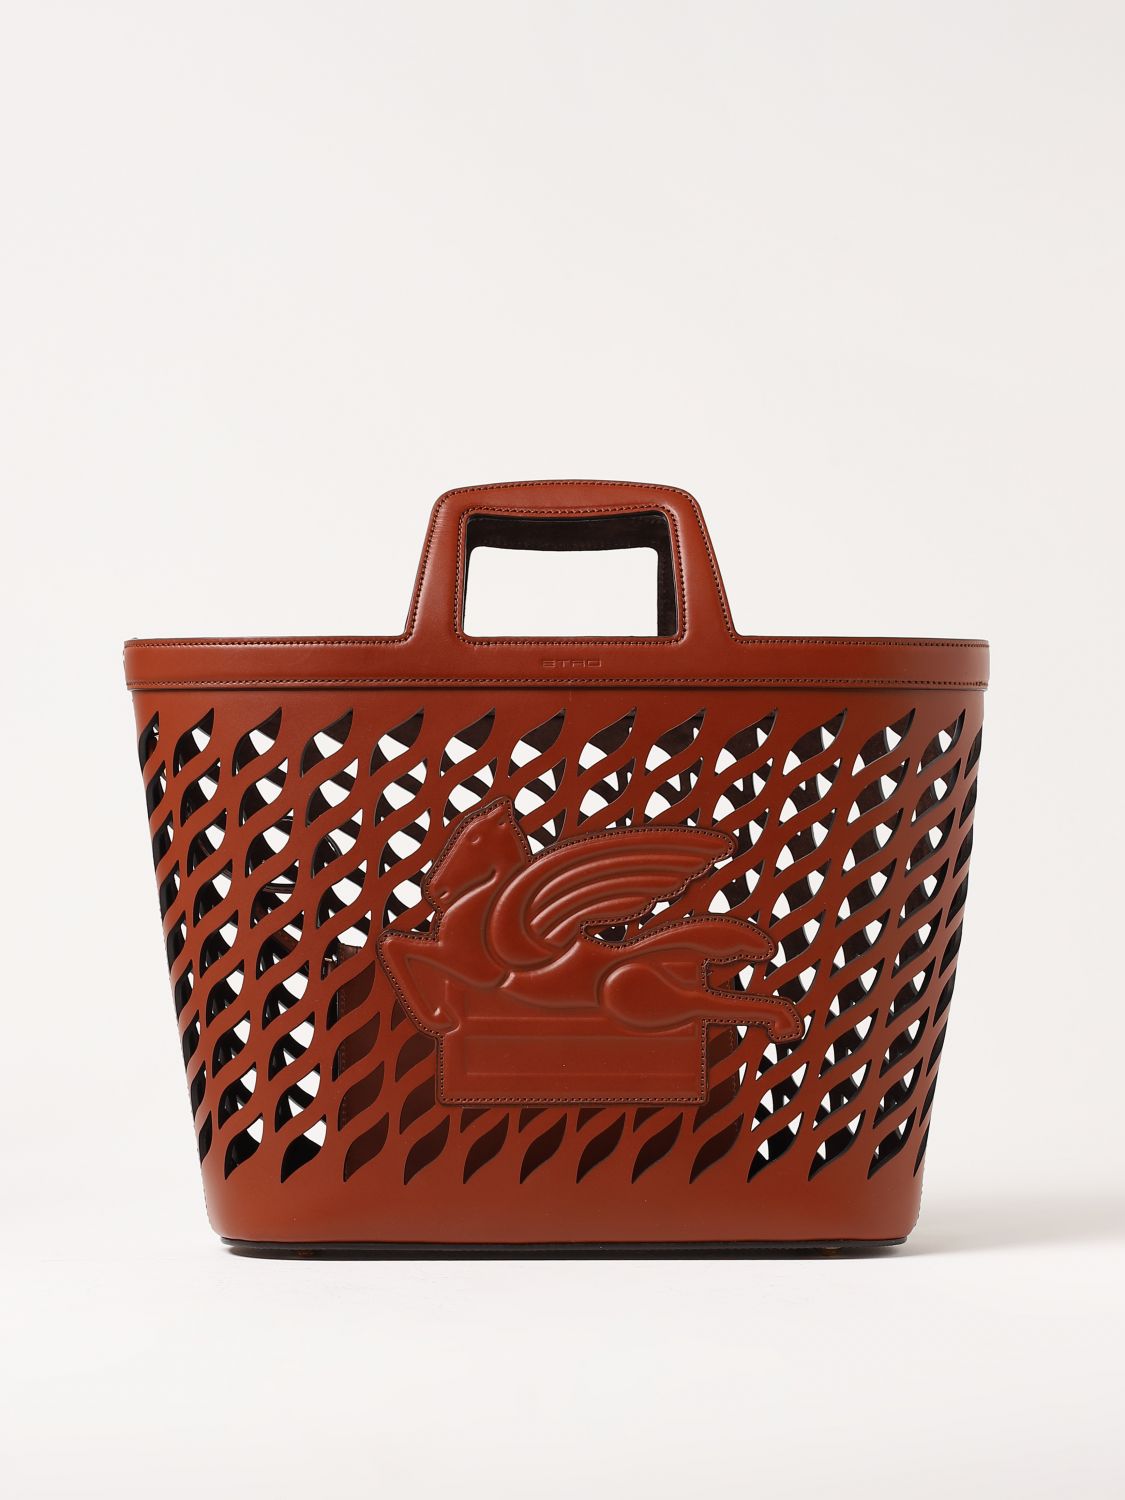 ETRO BAG IN PERFORATED LEATHER,E66279032